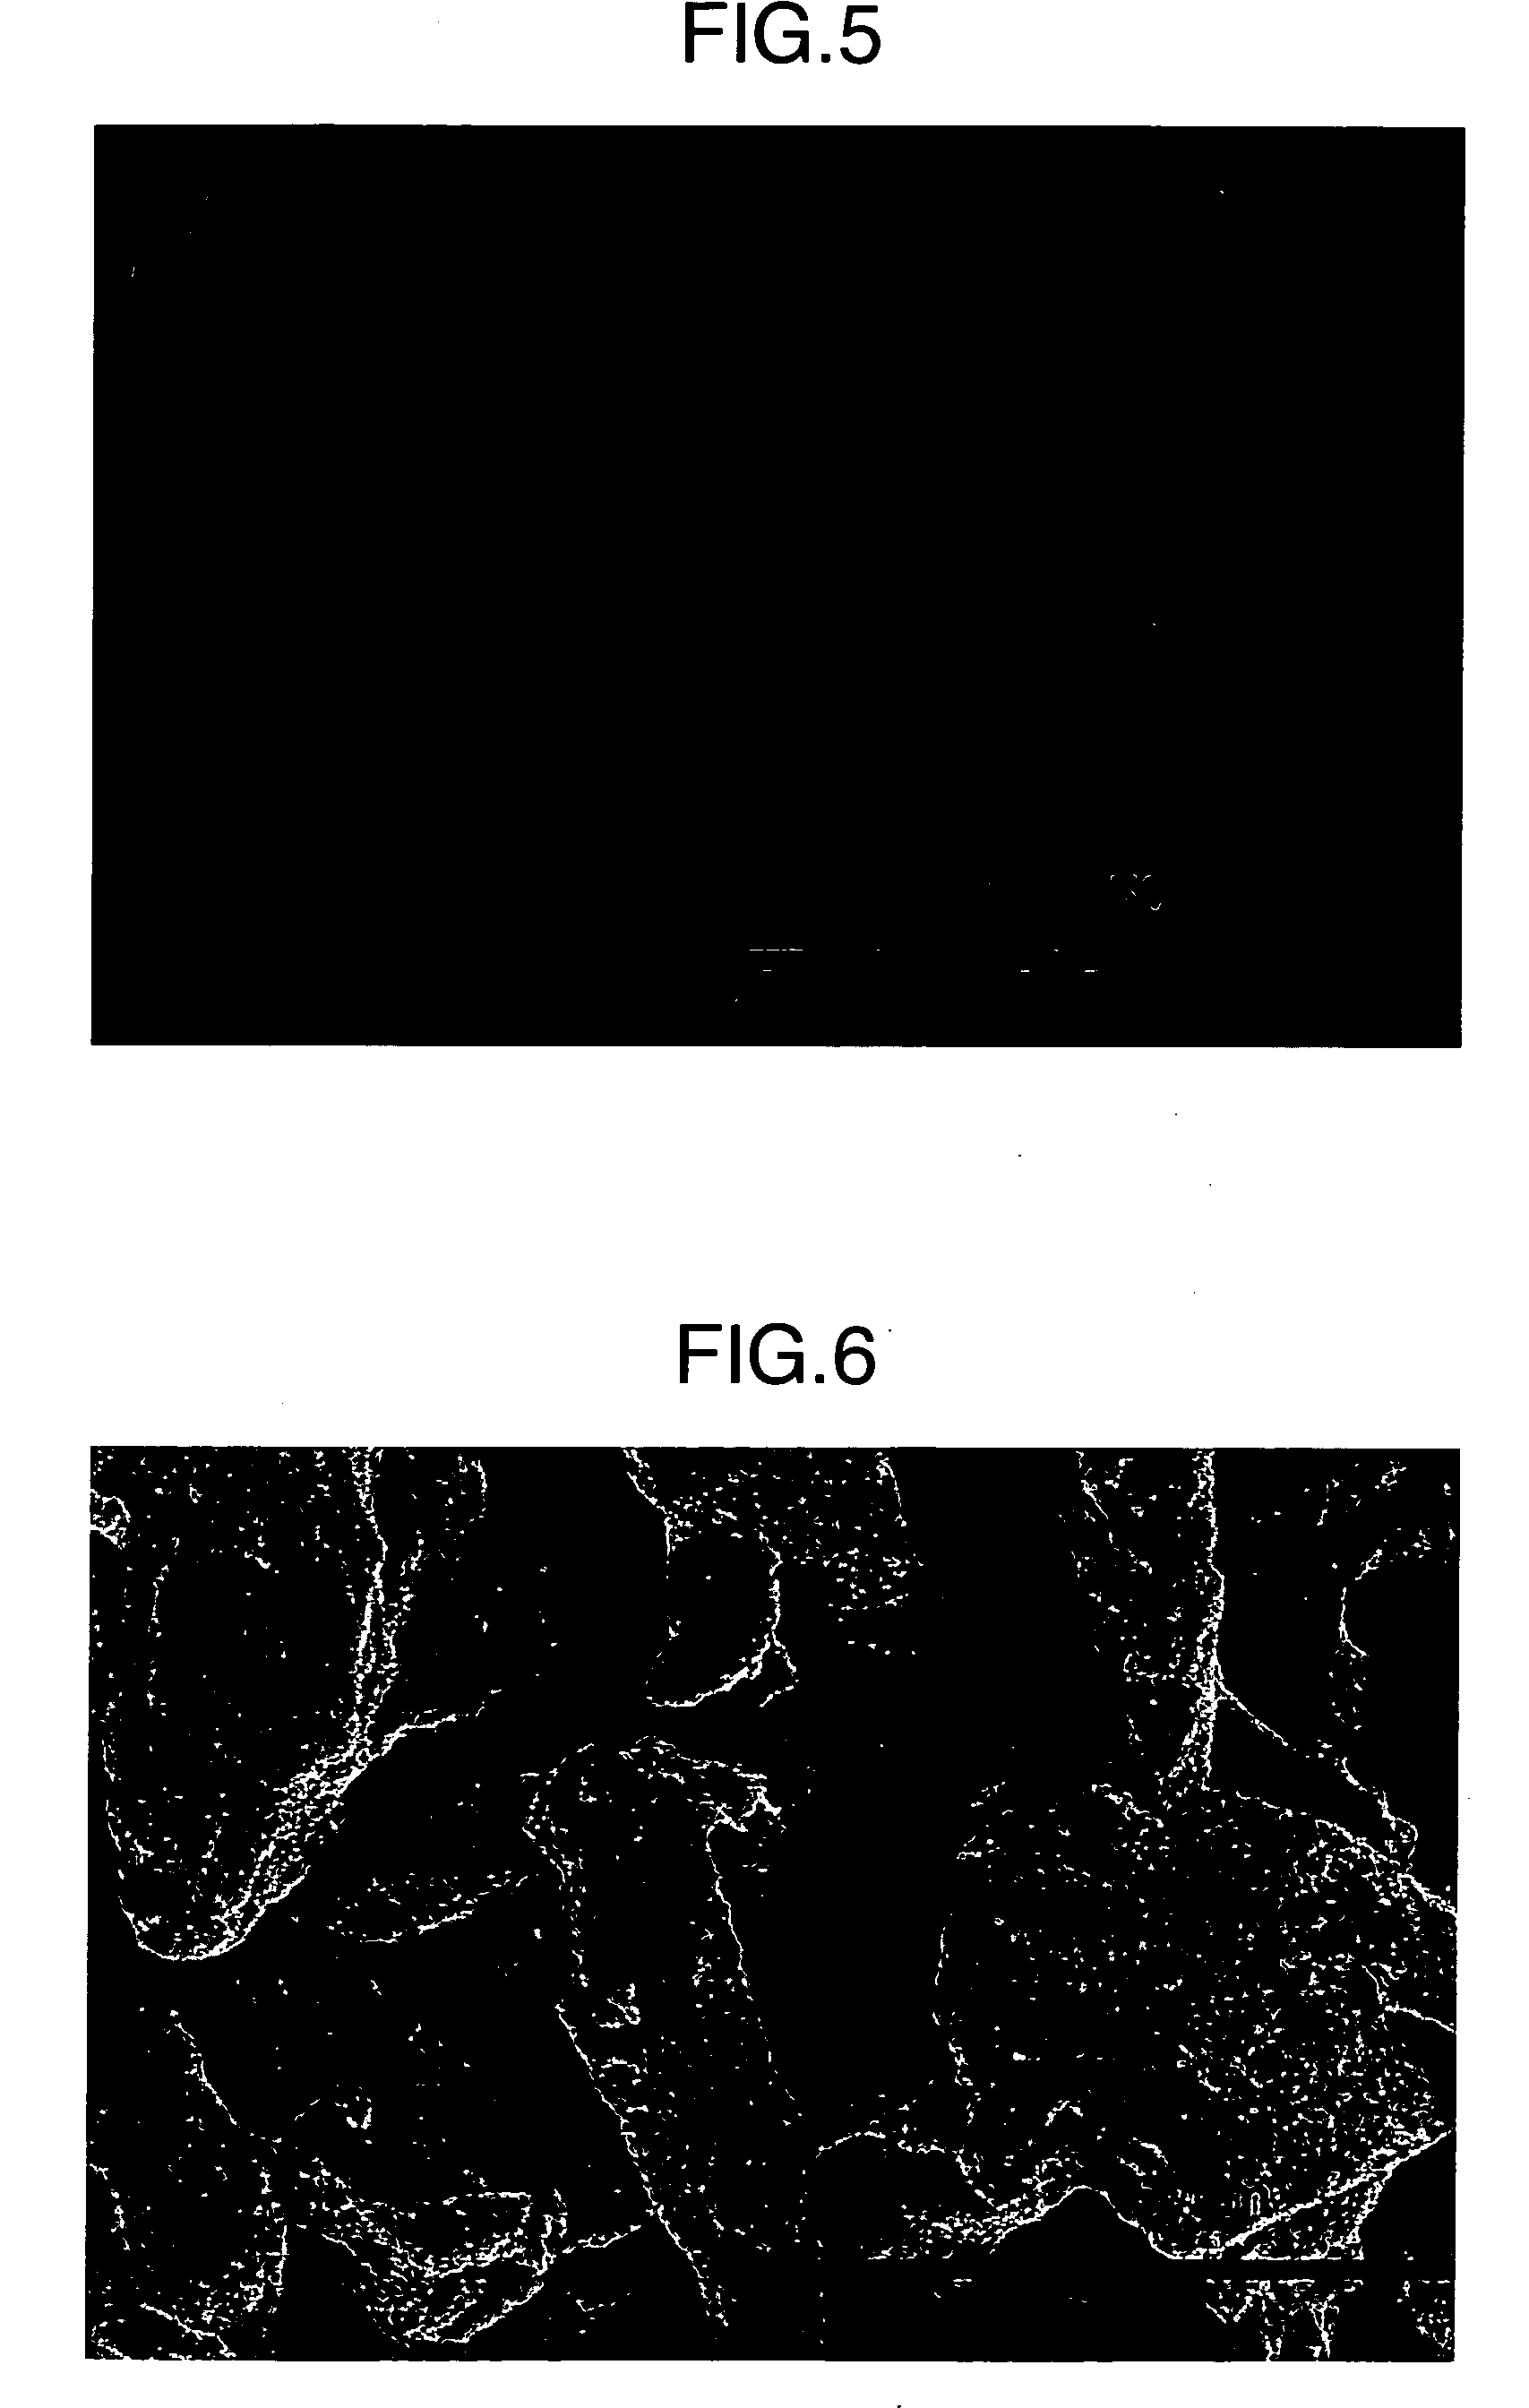 Porous cellulose aggregate and formed product composition comprising the same